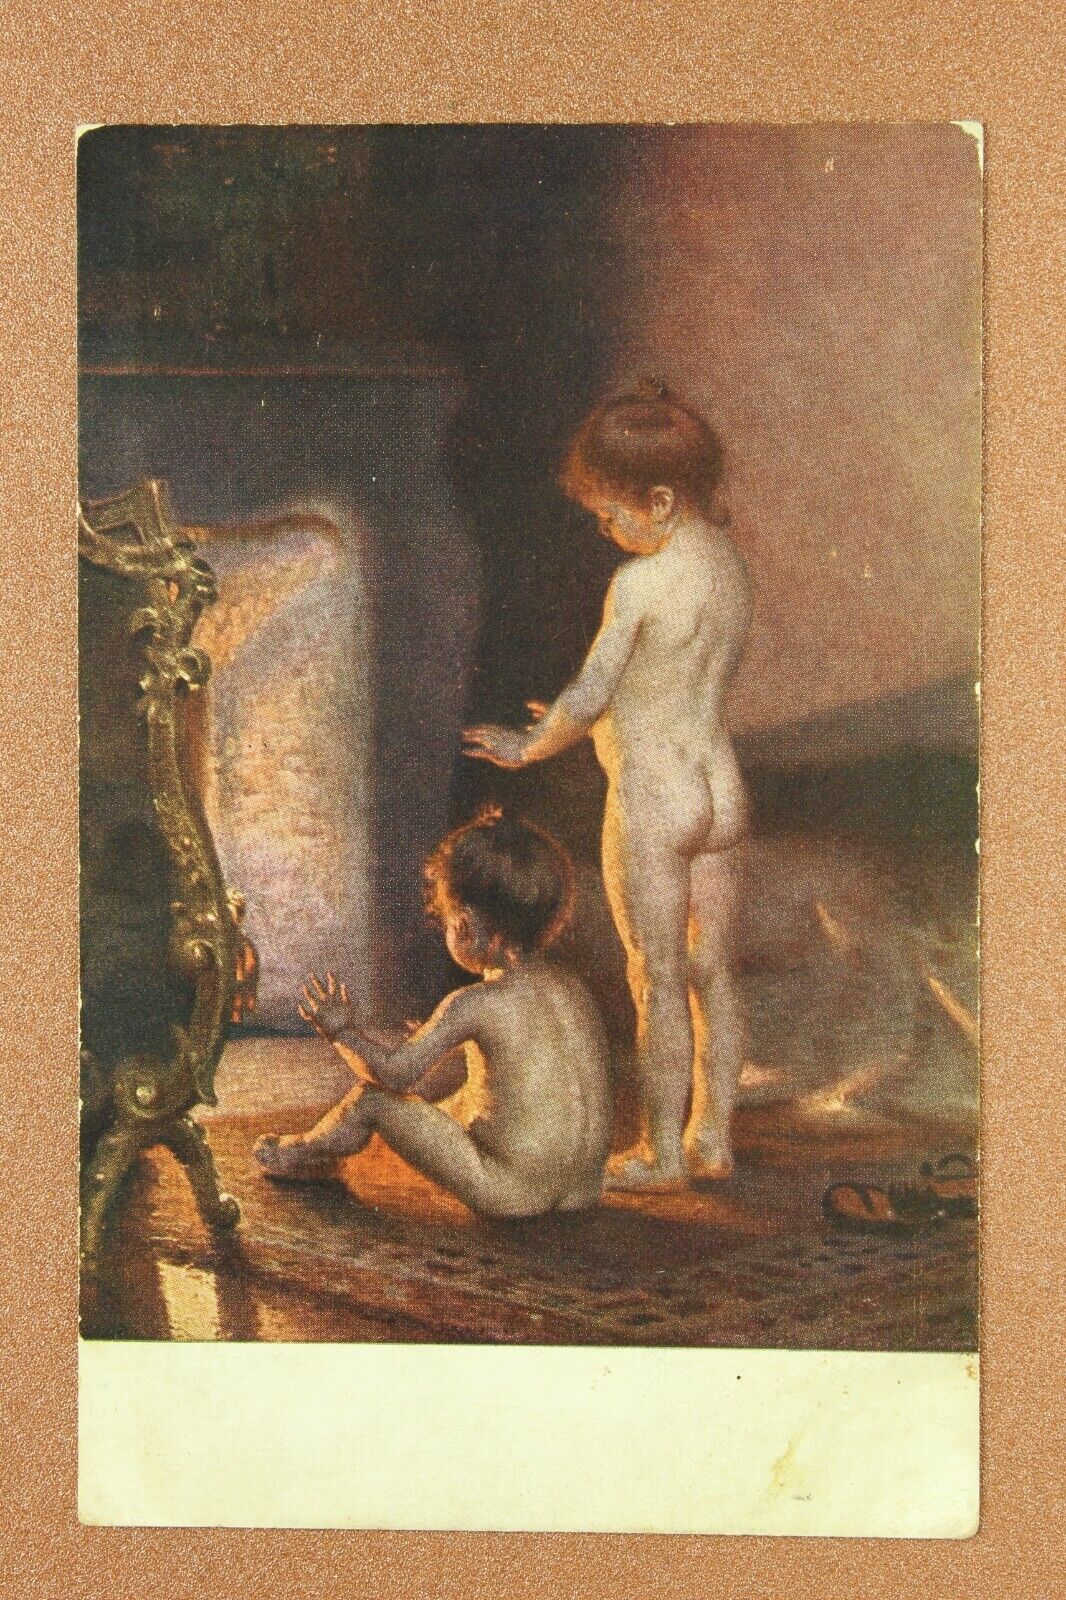 After bathing Baby boys at the fireplace. Tsarist Russia GOLIKE postcard 1906s🔥